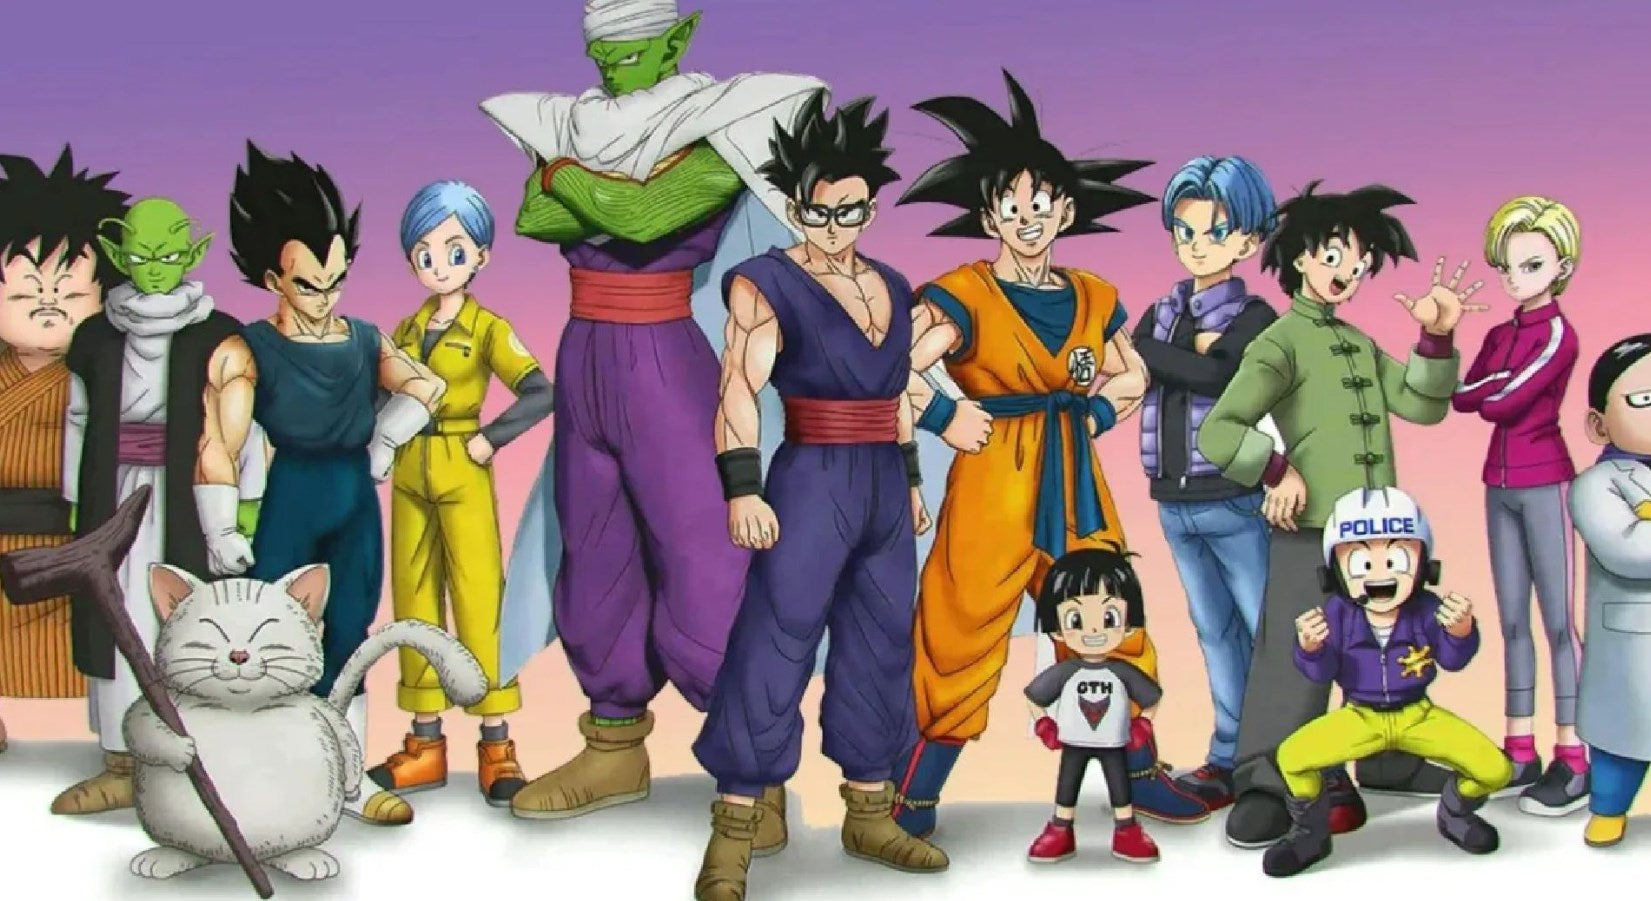 Who Do You Like In The Dragon Ball